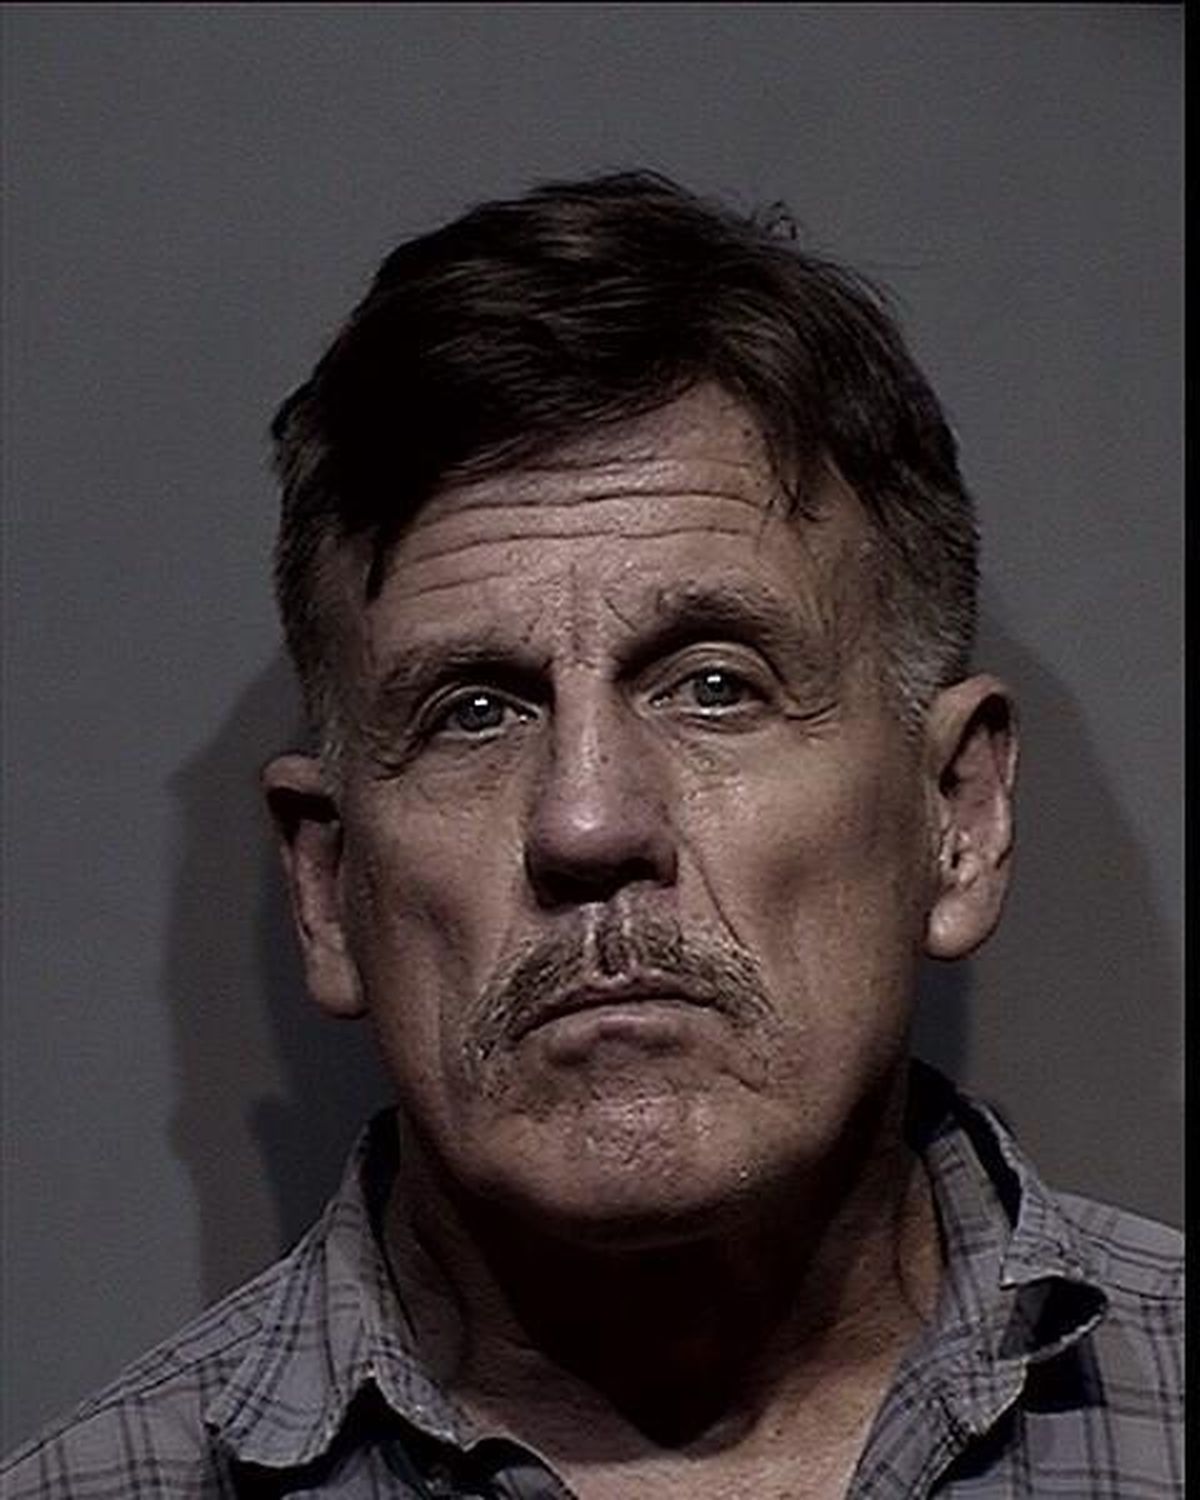 The Kootenai County Sheriff’s Office arrested Michael A. Campbell, 70, after deputies found 58 pounds of marijuana in his car during a traffic stop Thursday. (Kootenai County Sheriff’s Office)